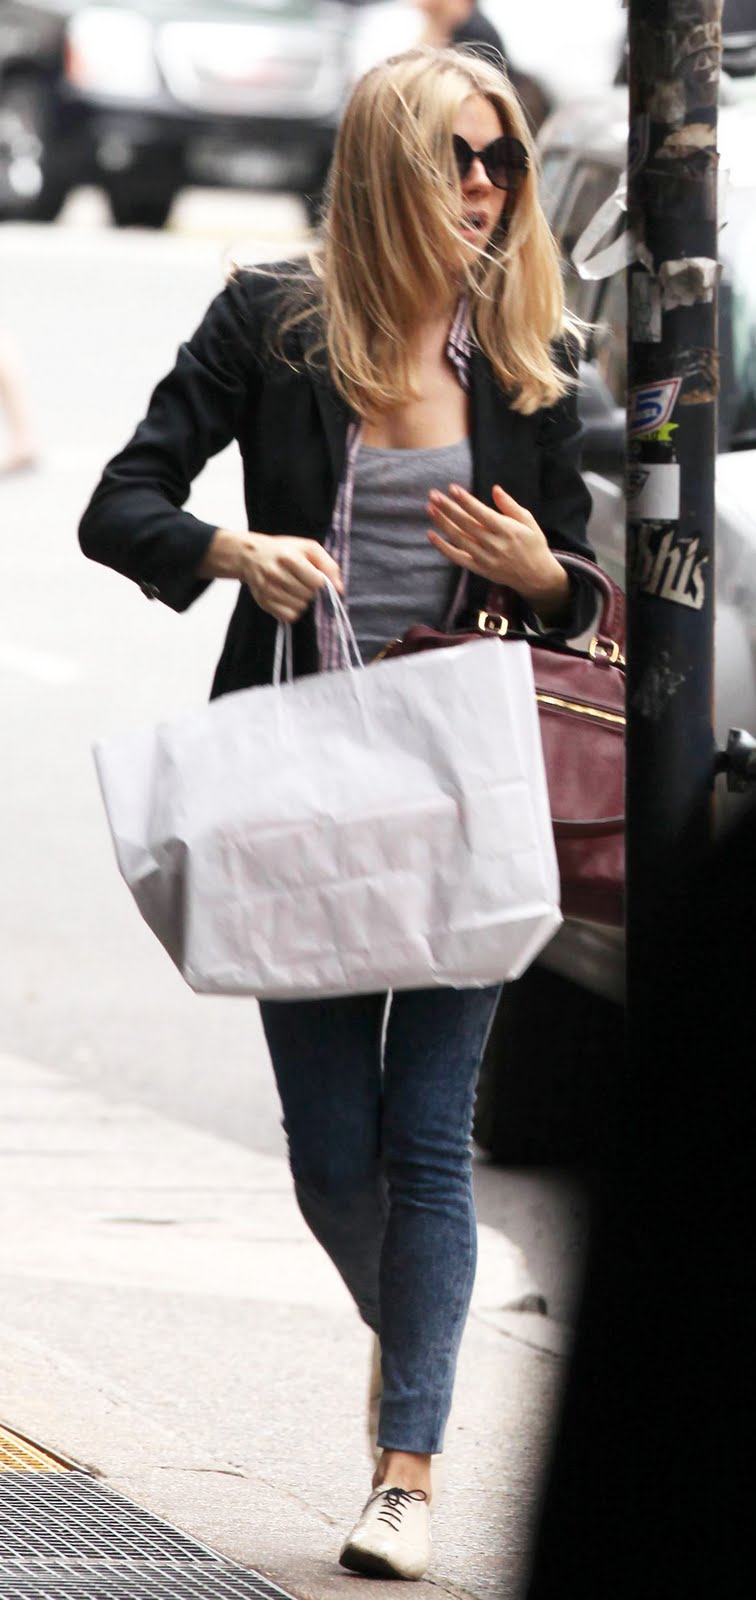 [Sienna_Miller_-_Arriving_at_her_apartment_in_NYC_03.12.2009__02.jpg]